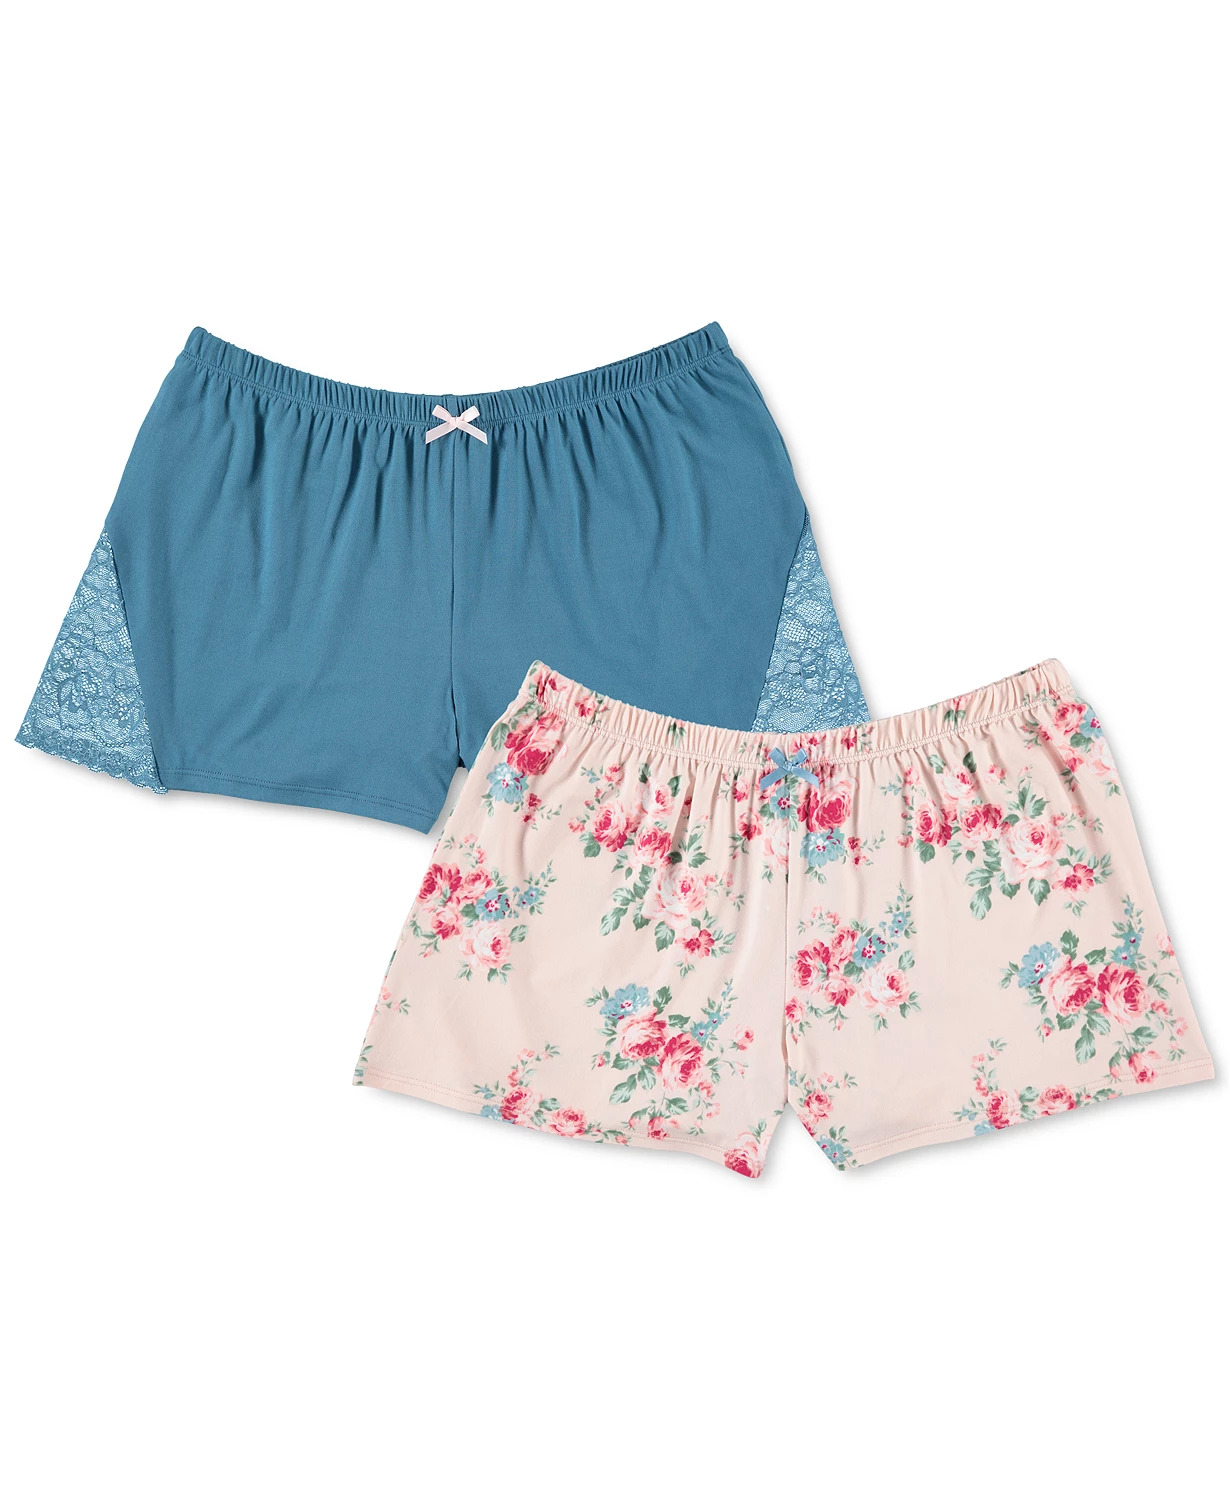 2-Pk. Flora by Flora Nikrooz Women's Solid & Printed Knit Sleep Shorts (various) $7 ($3.50 Each) & More + SD Cashback + Free Store Pickup at Macy's or FS on $25+